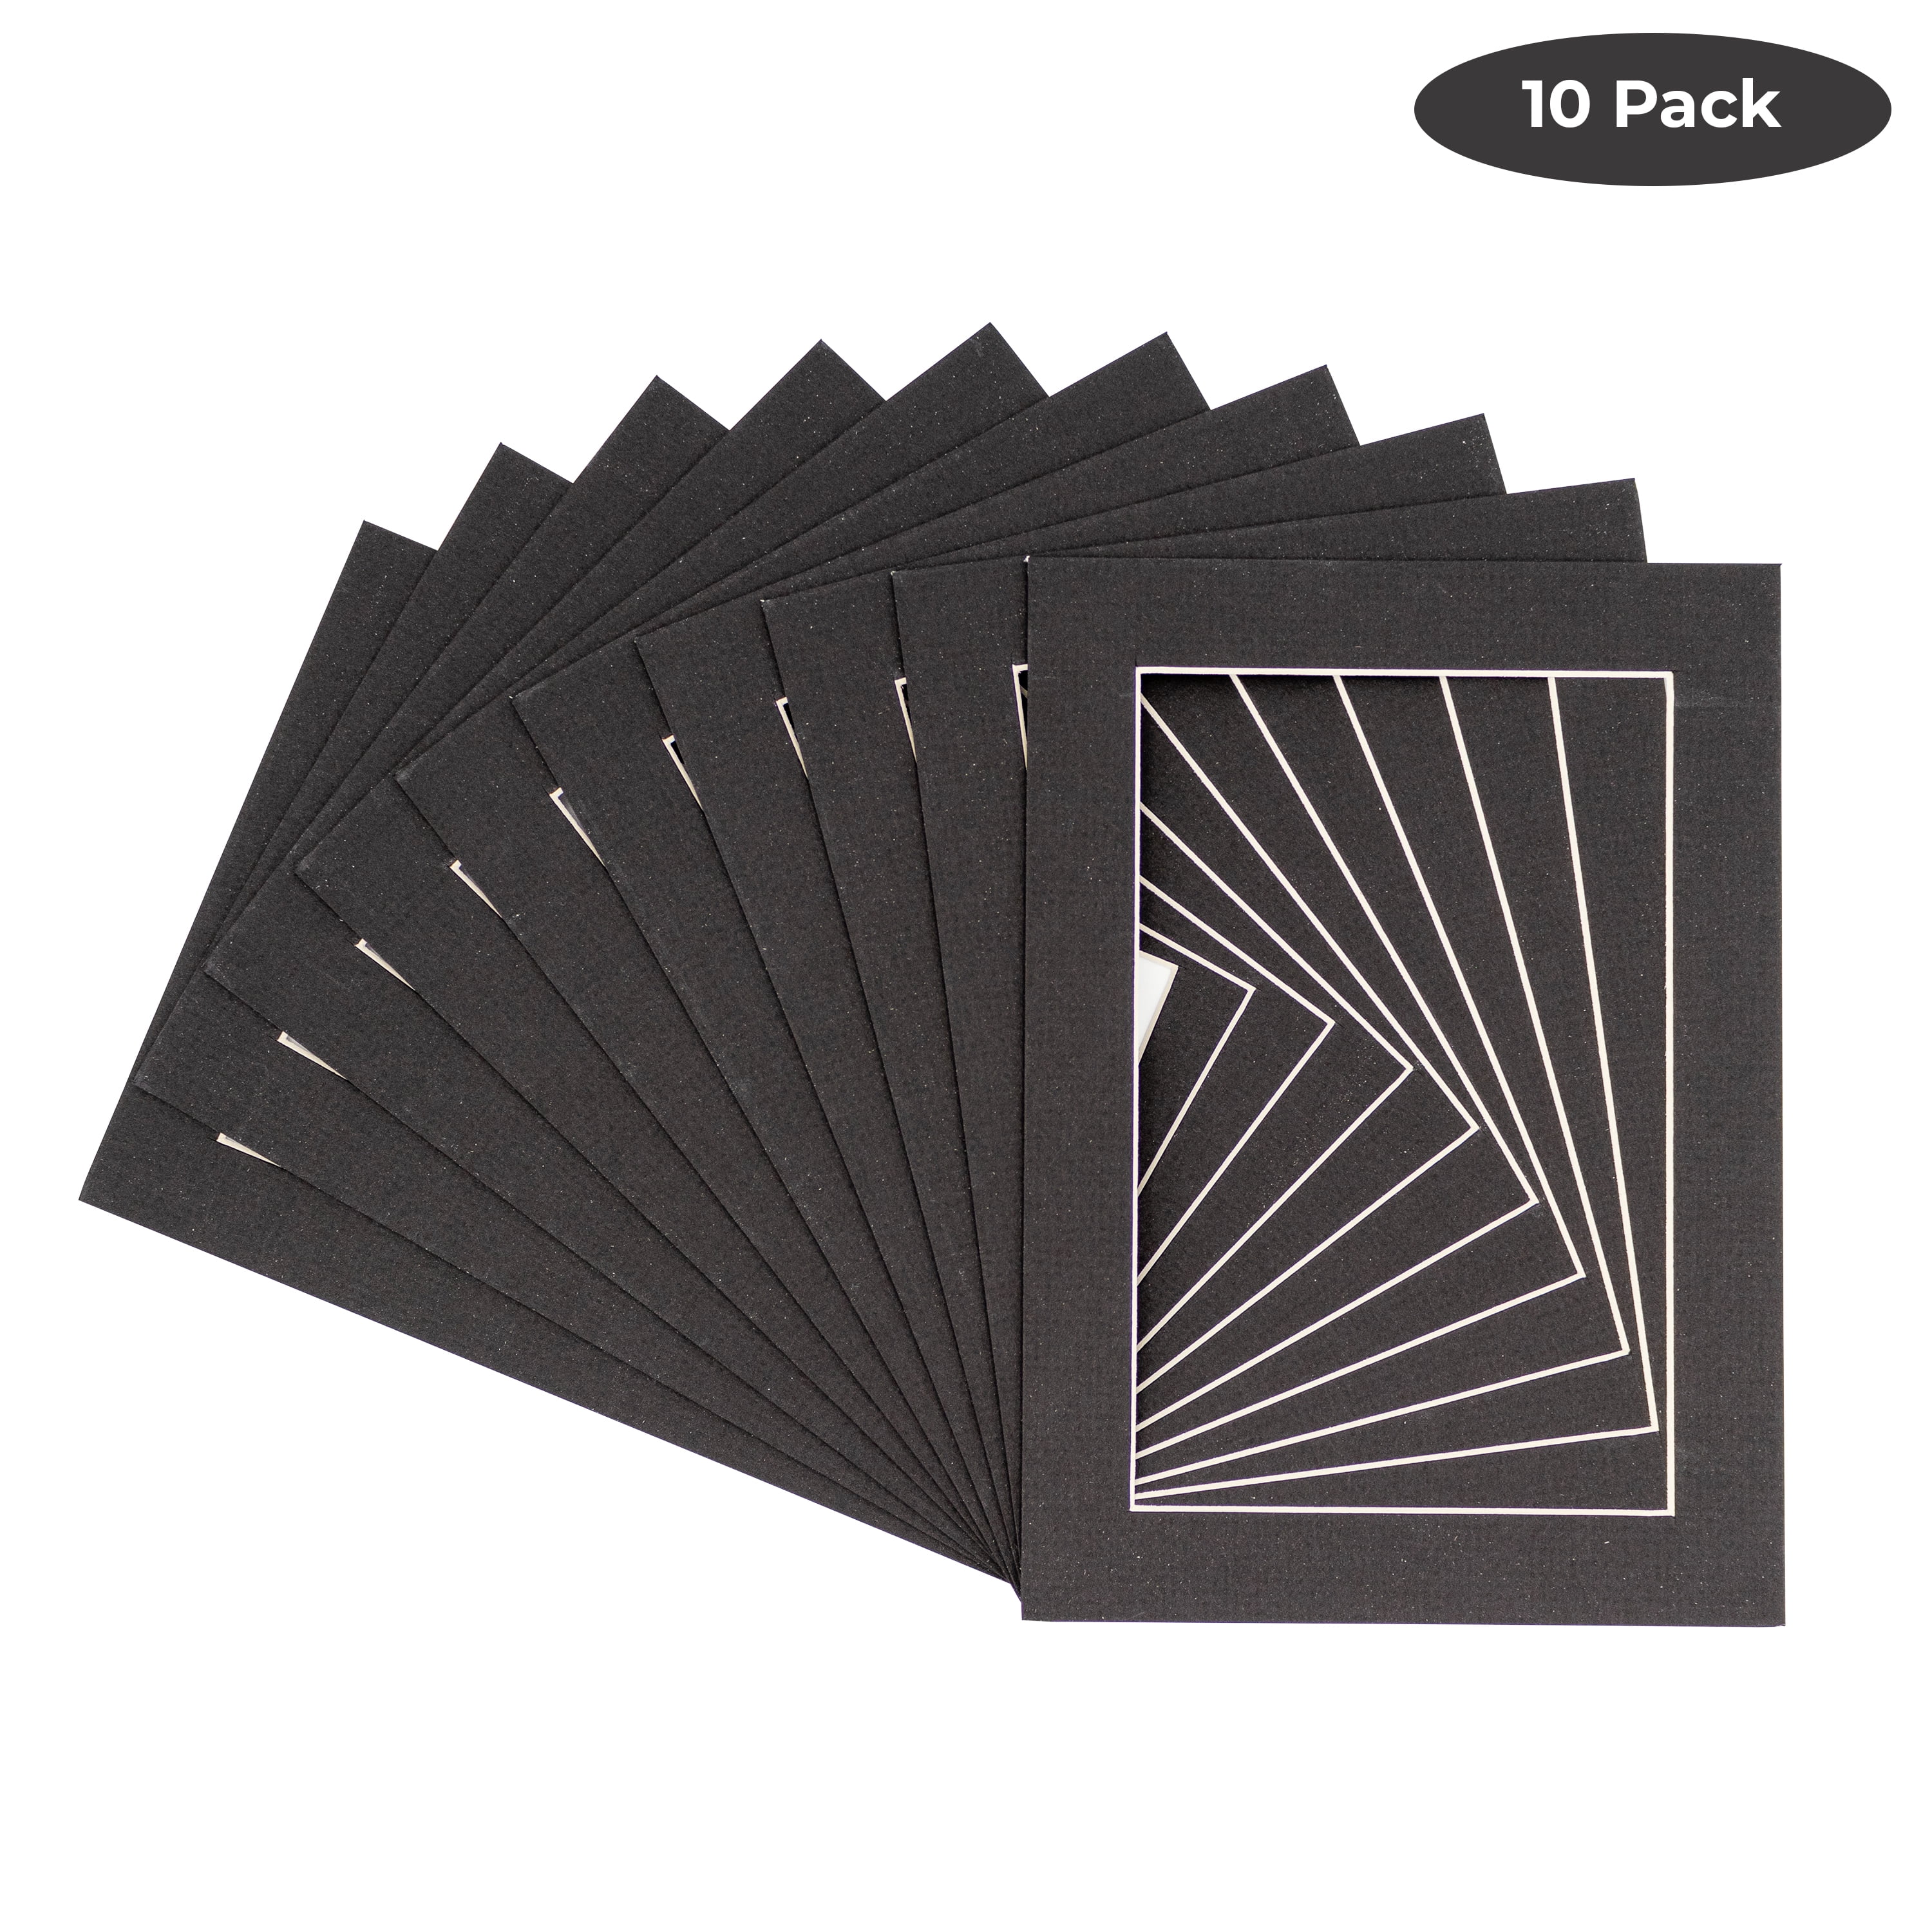 10 Pack Betus 8x10 White Picture Mats White Core Bevel Cut for 5x7 Pictures 